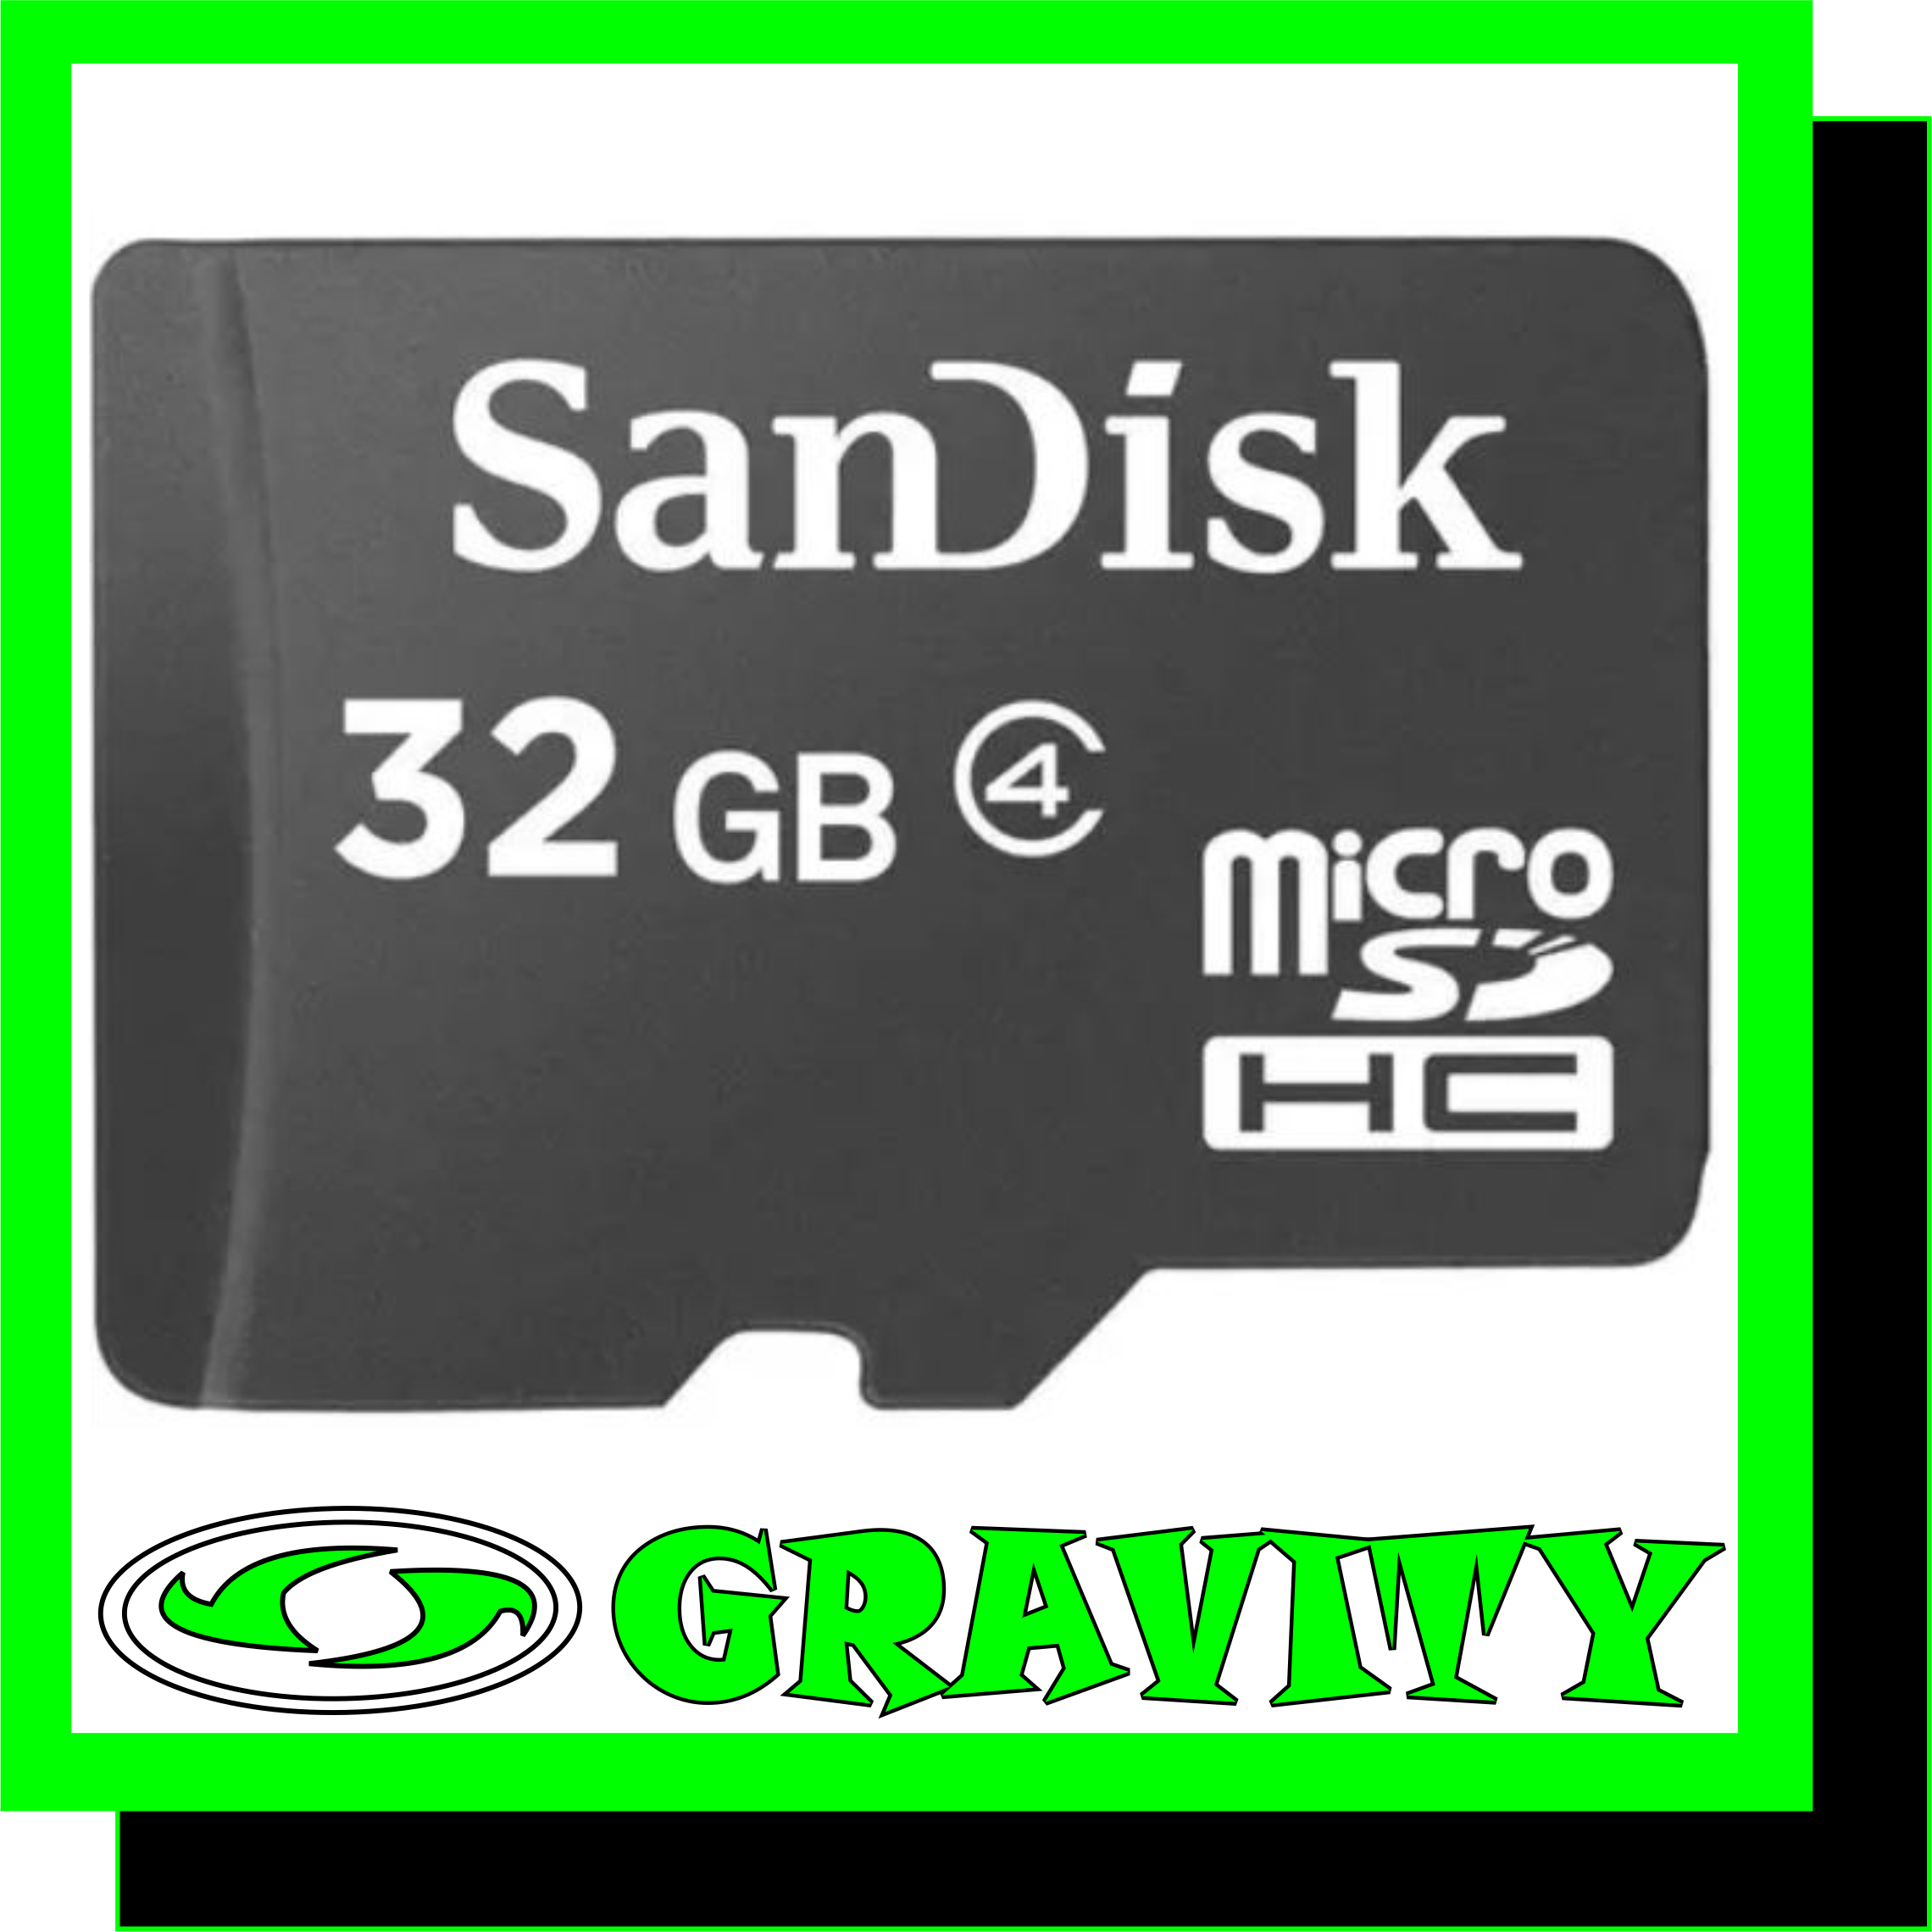 SanDisk microSDHC mobile memory card is the ideal companion for multimedia phones because it plugs right inside the phone providing immediate expansion of memory storage needed for carrying more music, video, photos, games, and mobile software applications in the phones.